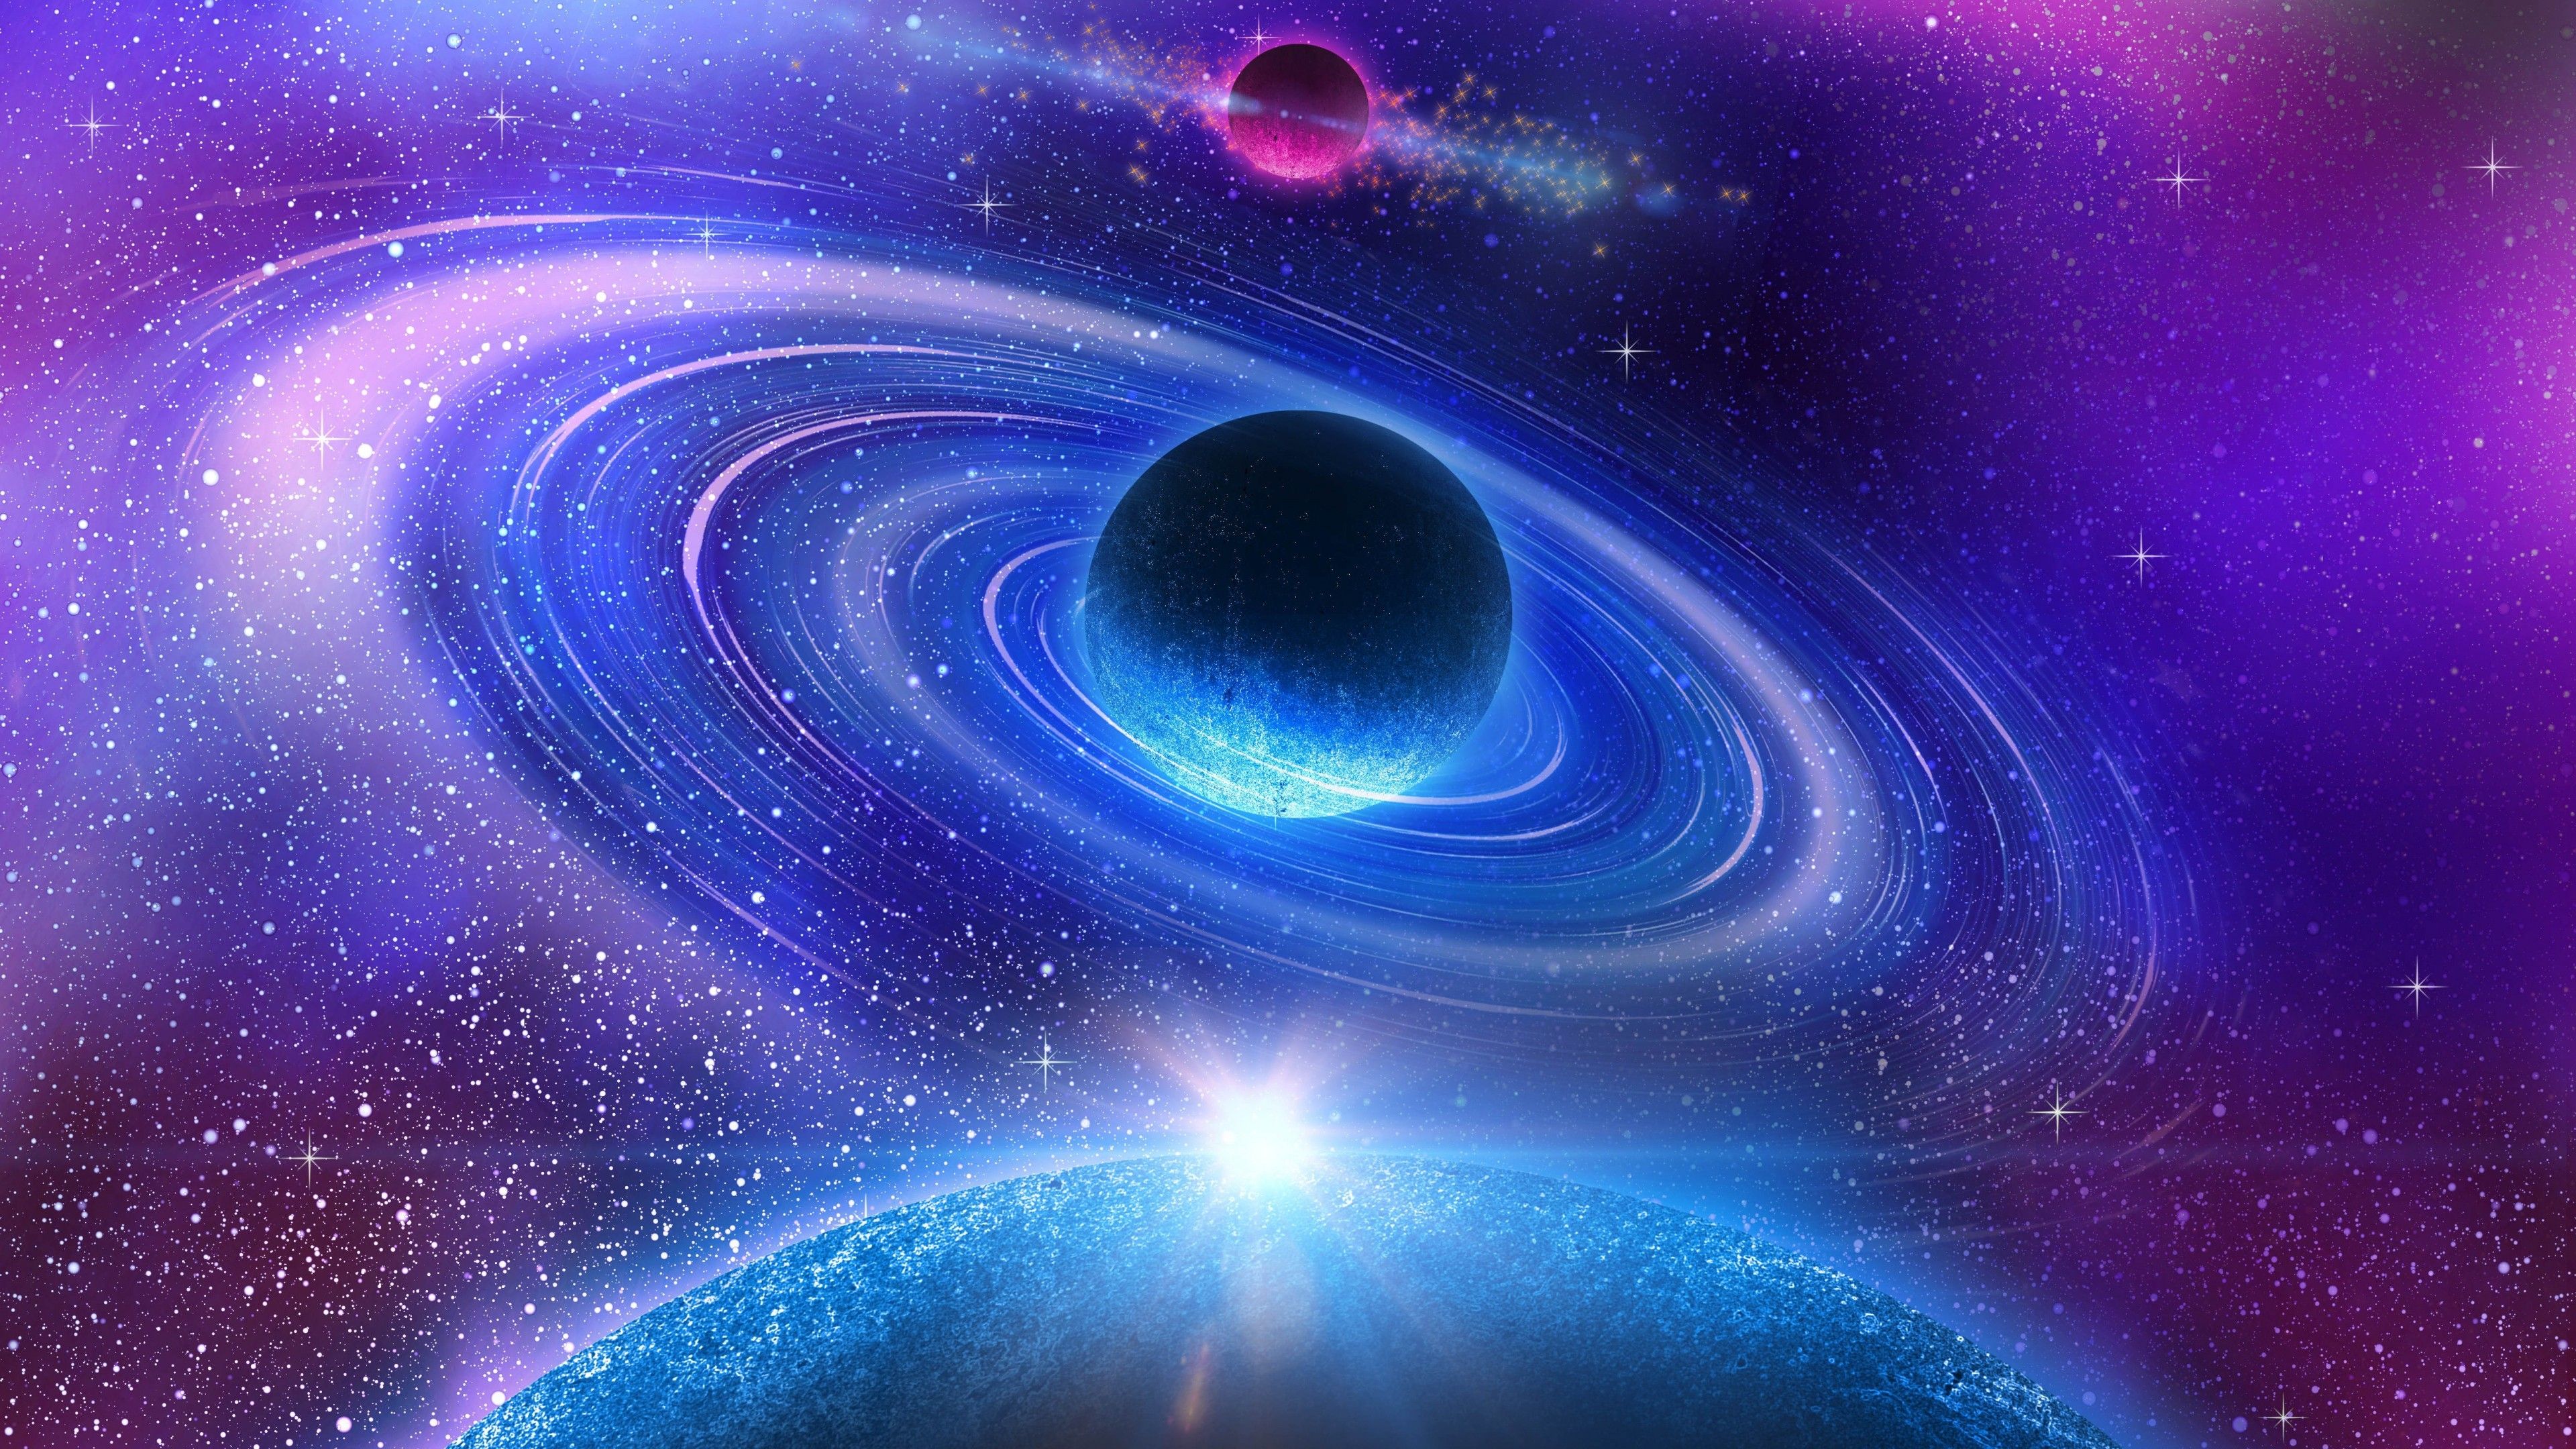 Space wallpapers 4K ·① Download free awesome High Resolution